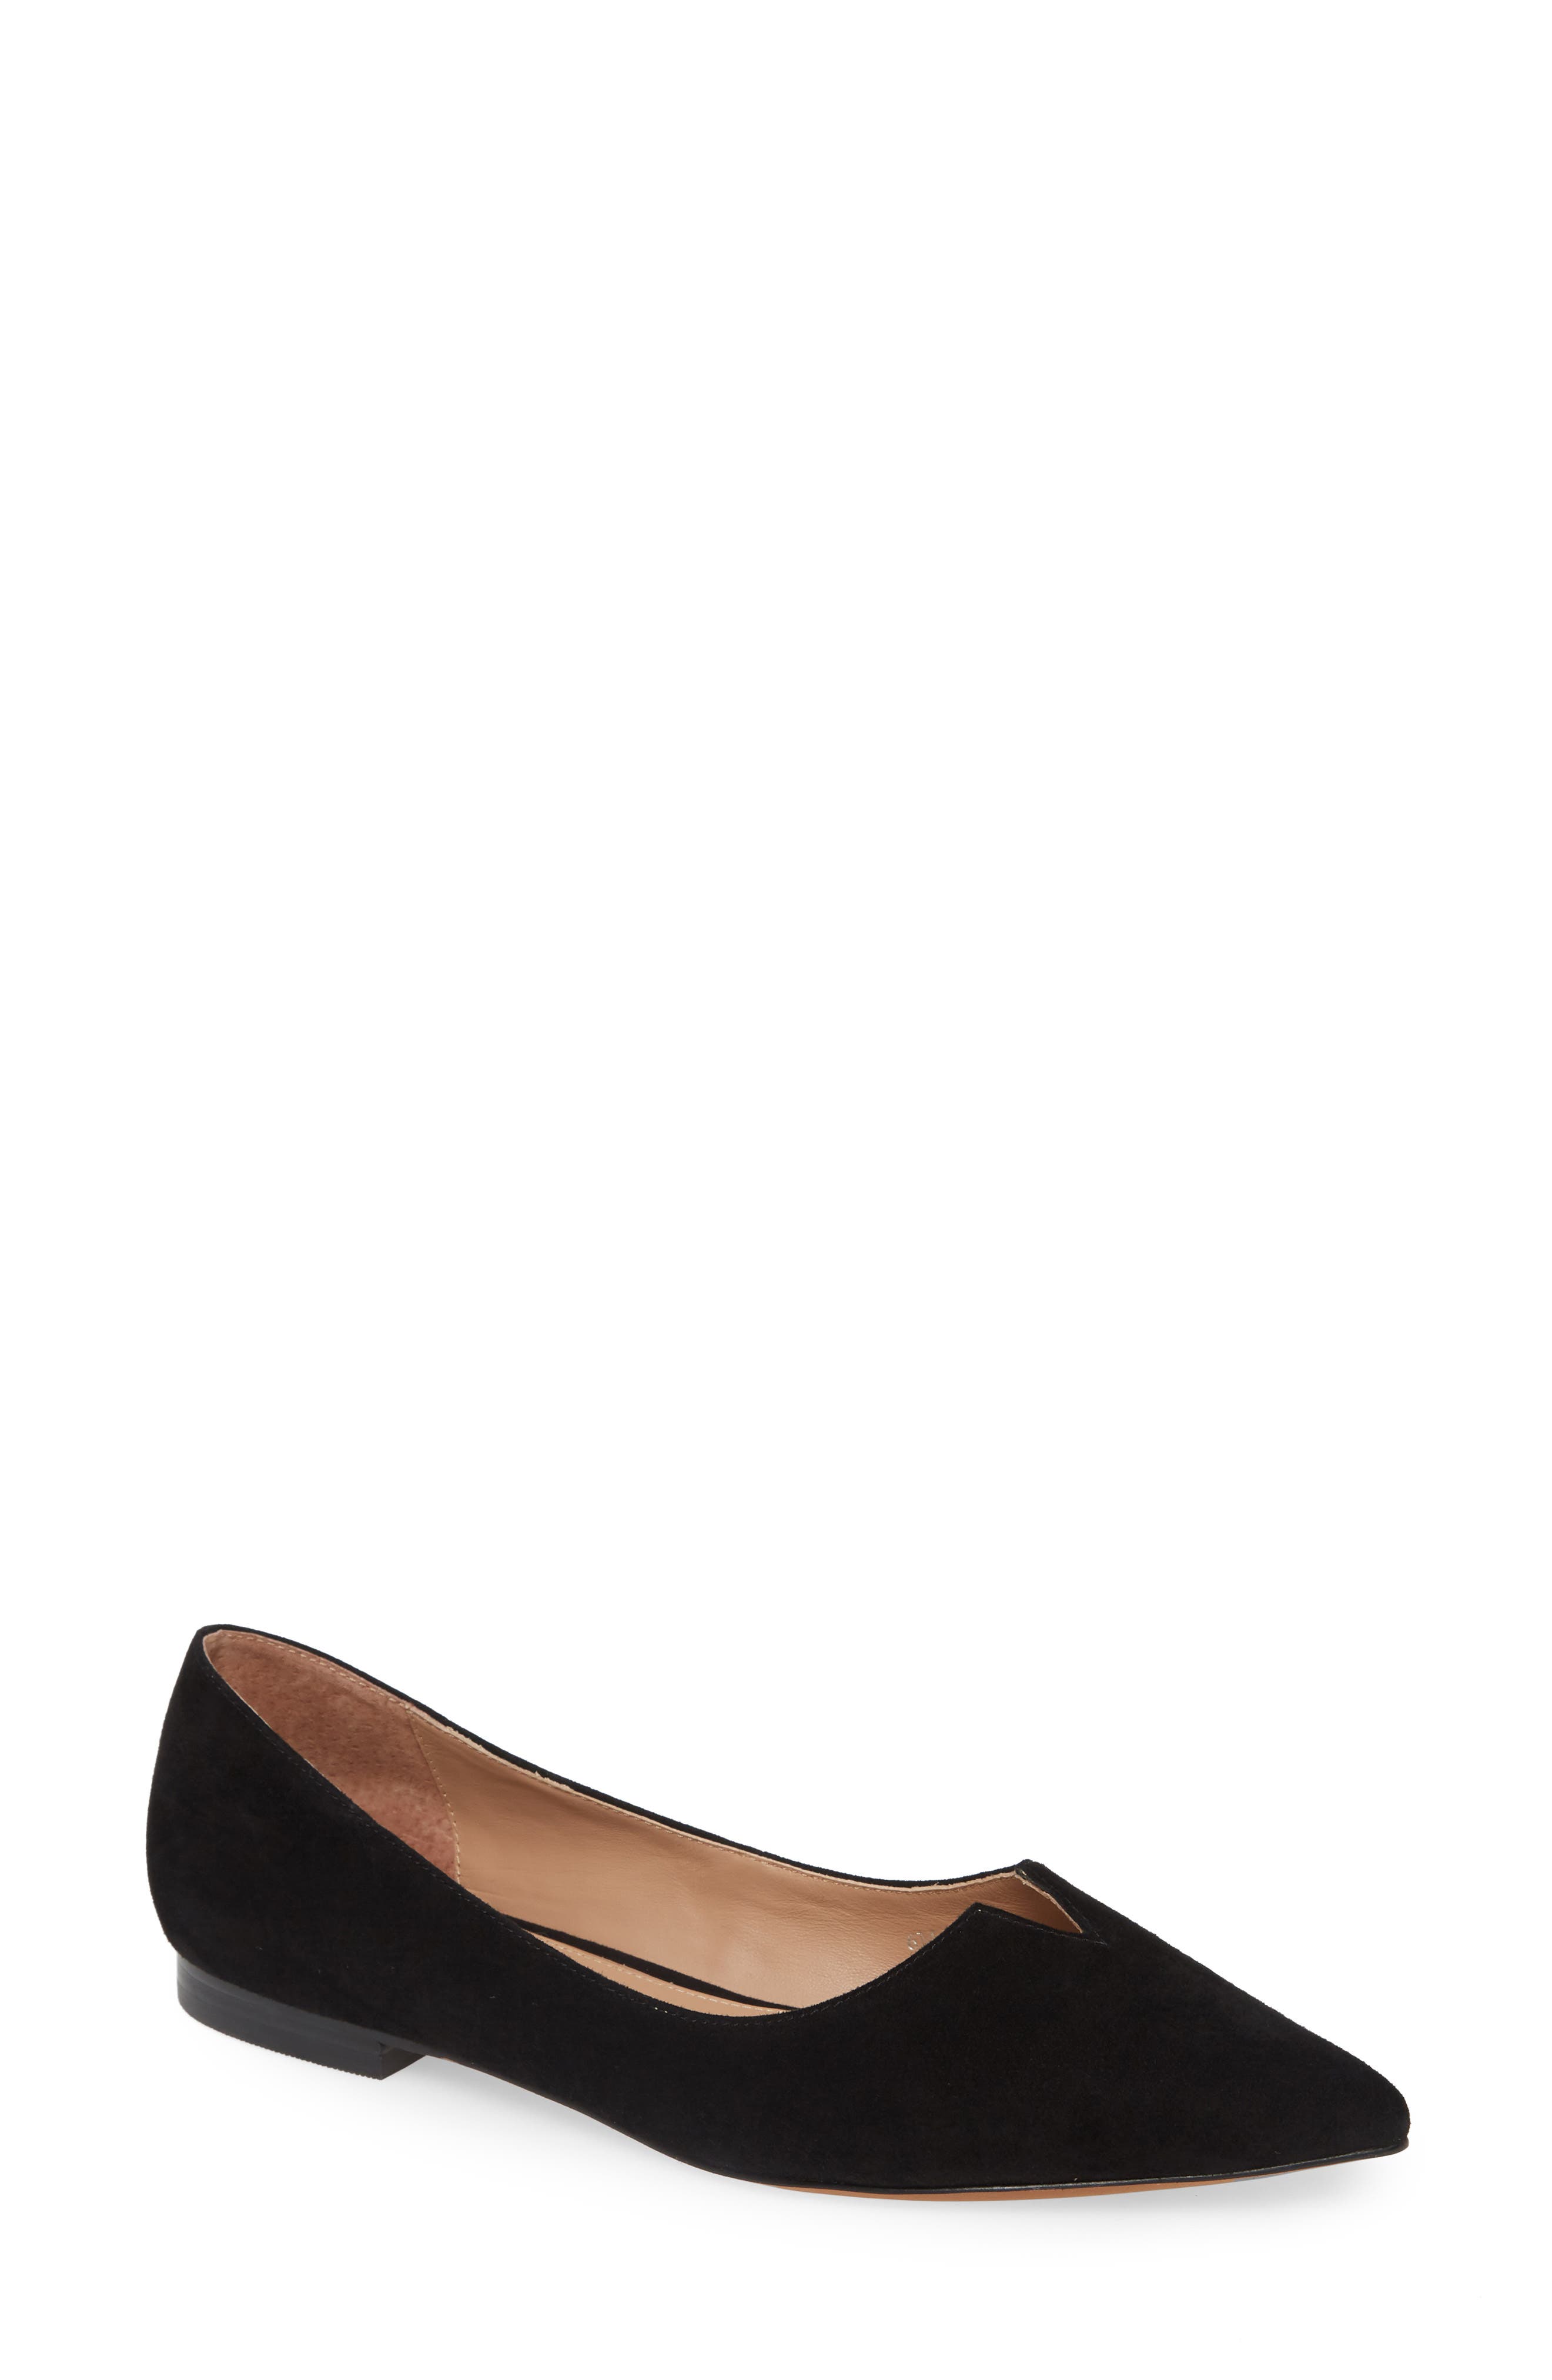 ladies pointed toe flats